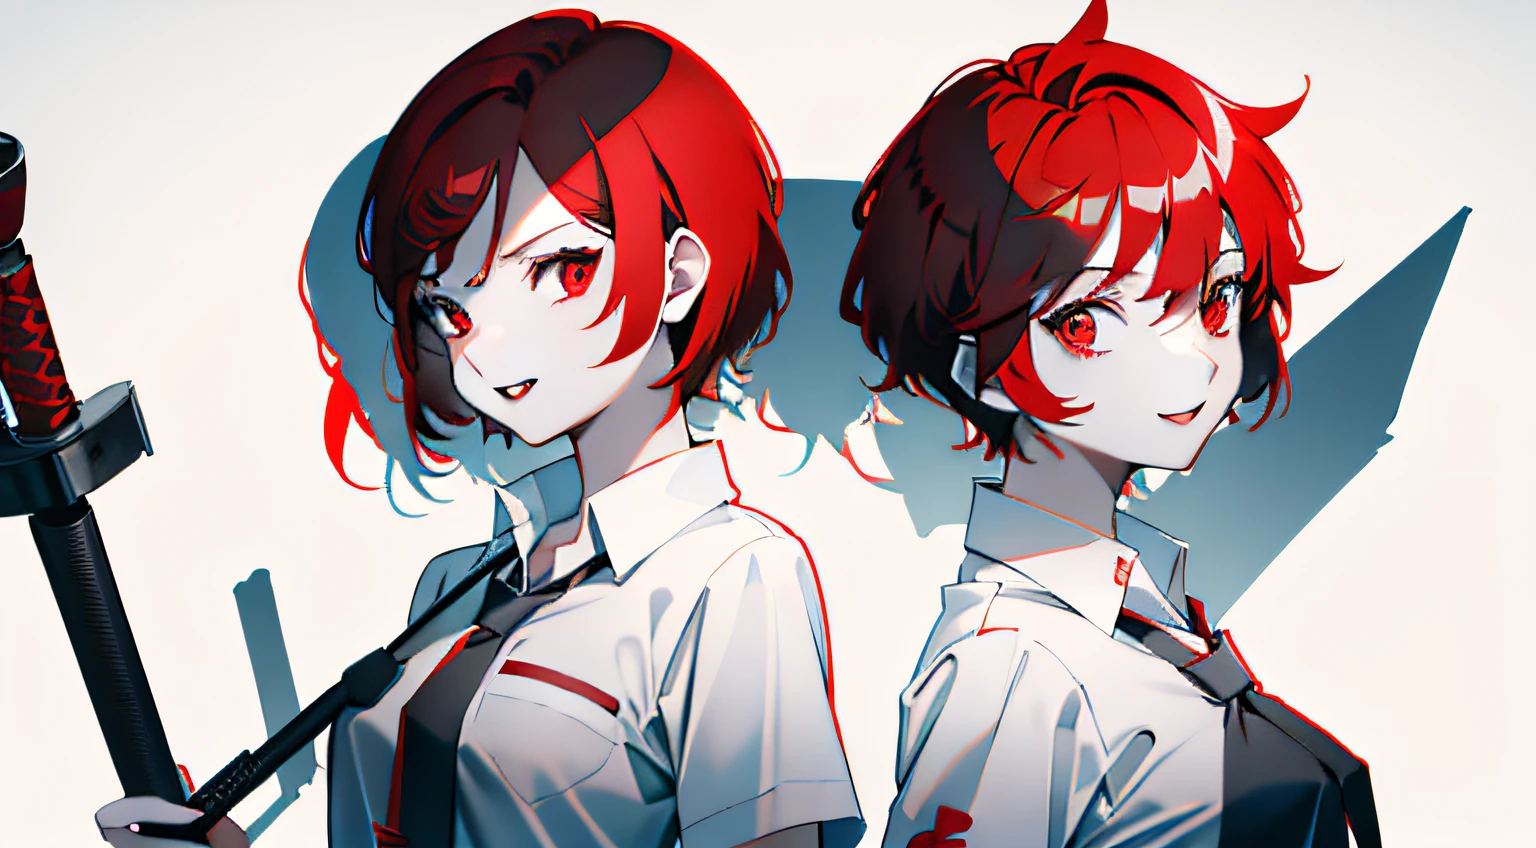 1girl with short red hair, red eyes, red lips and a tomboyish appearance, wearing a white shirt with a black blueish tie, paired with back bluish long pants. She has red devil horns and a crazy mad smile on her face, wielding an axe as her weapon.